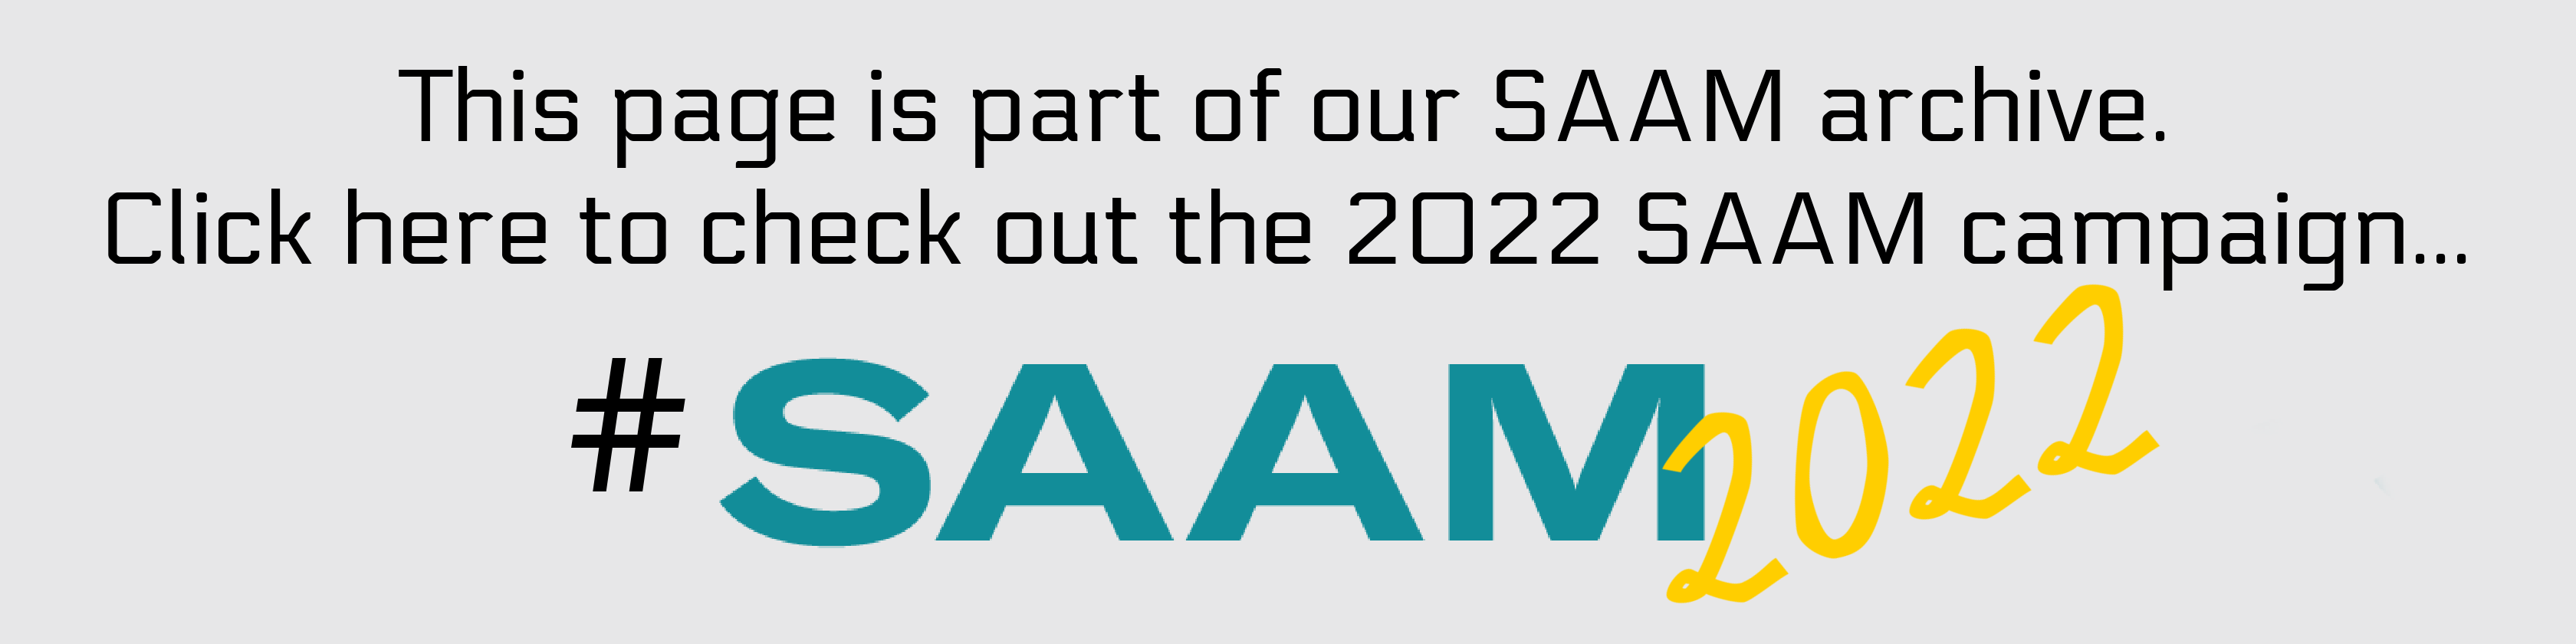 Text reads " This page is part of our SAAM archive. Click here for our SAAM 2022 Campaign"